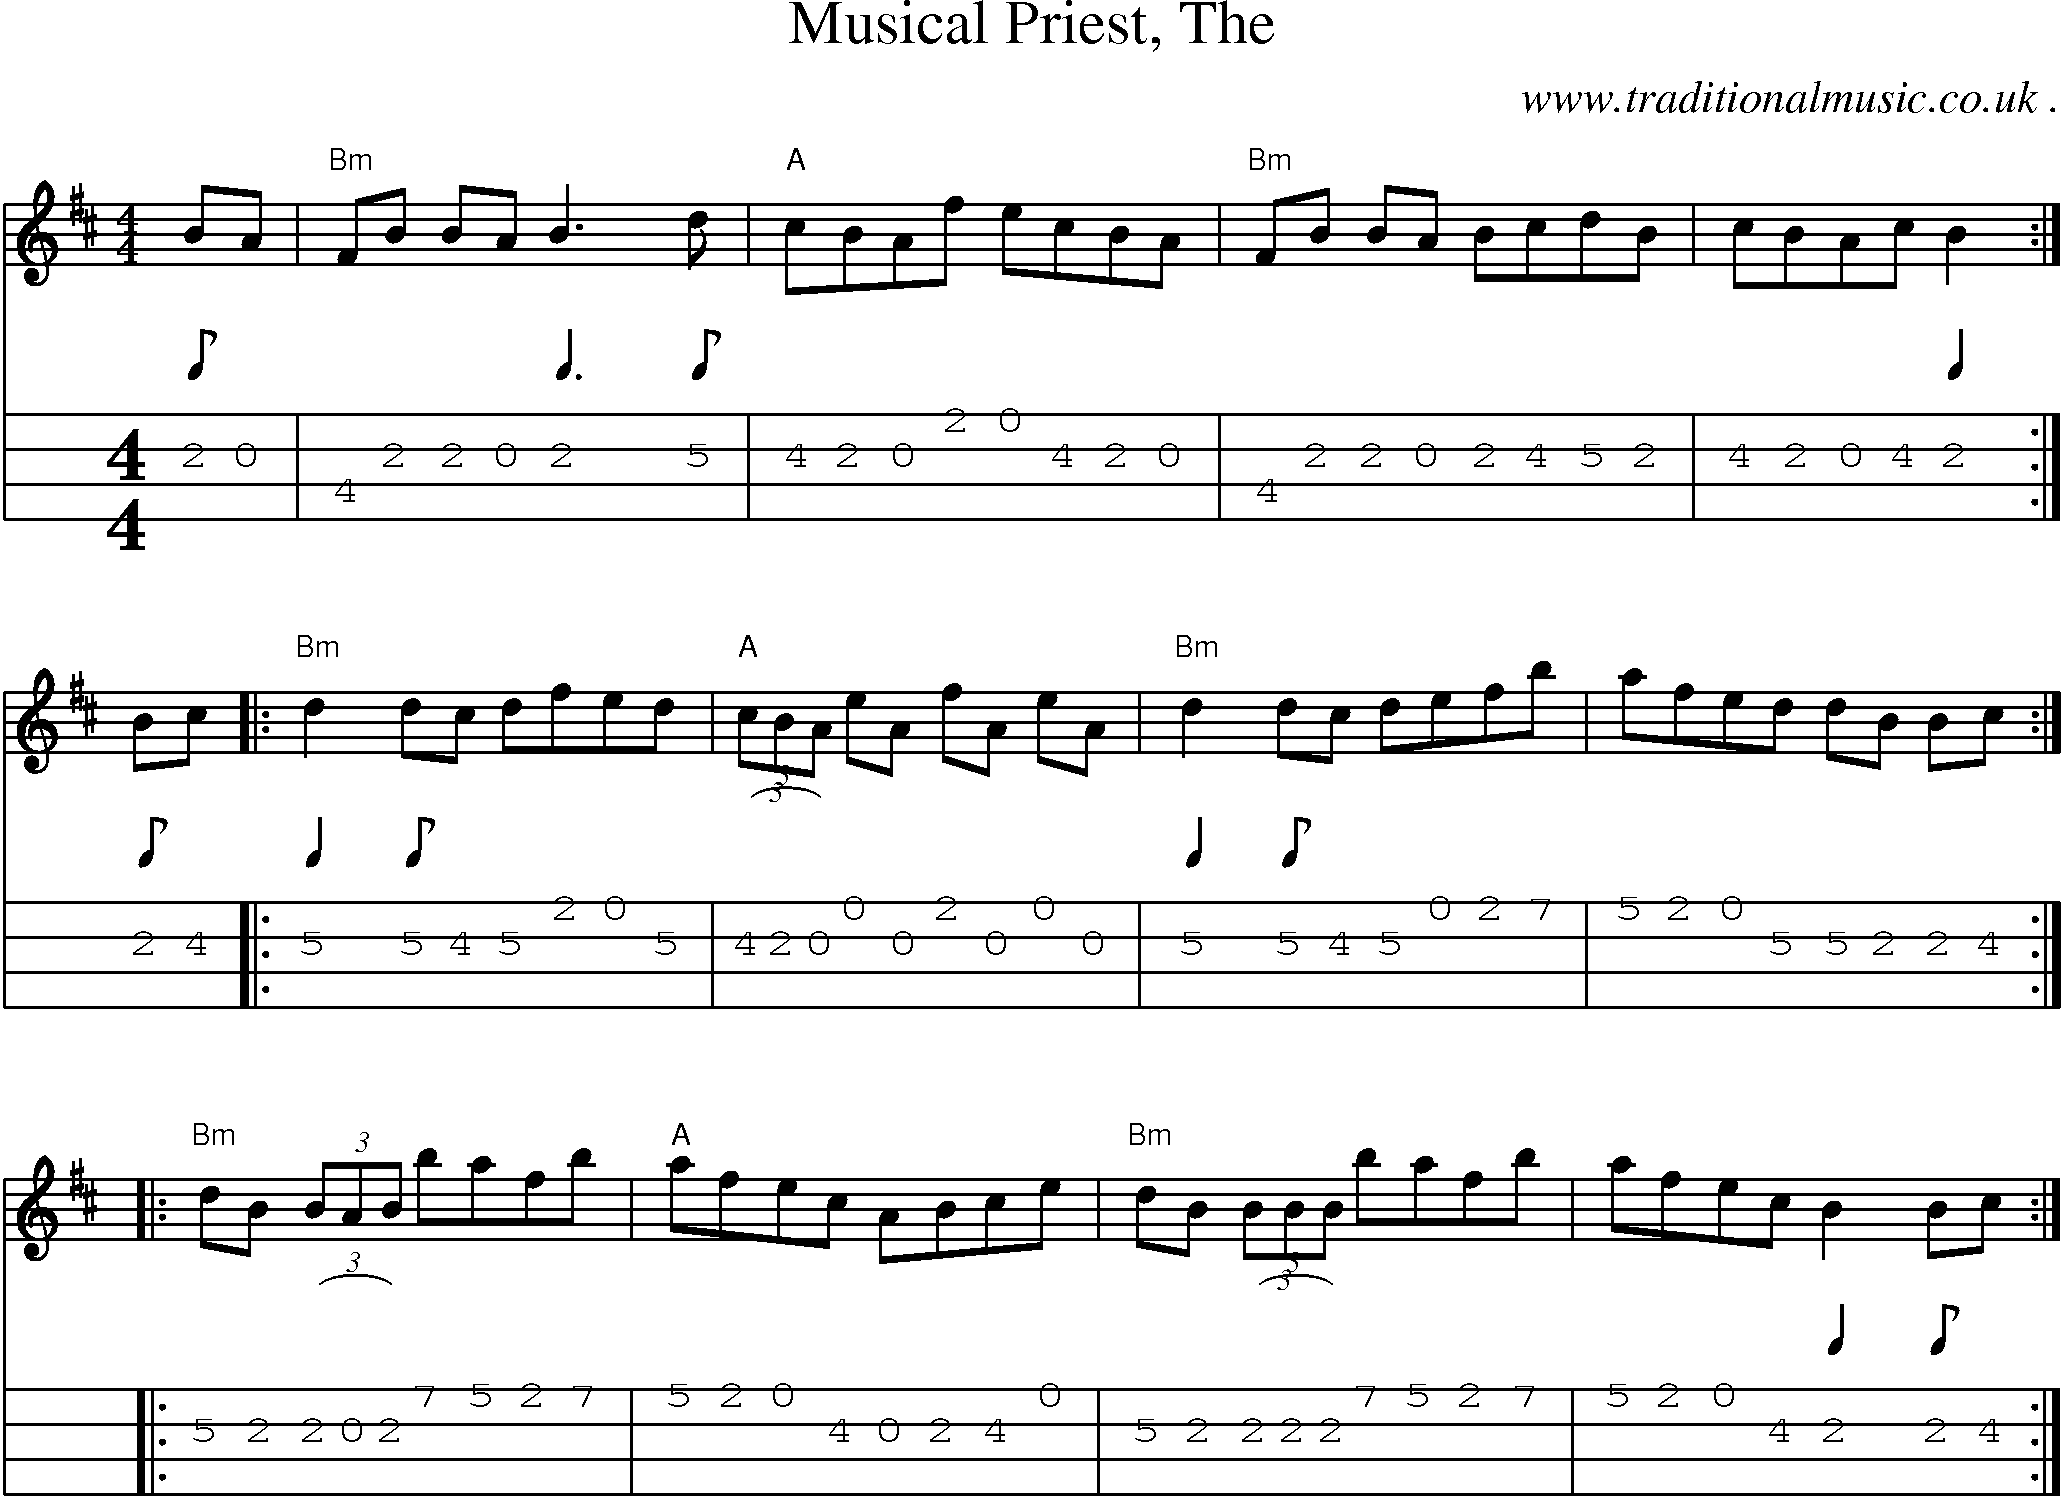 Music Score and Guitar Tabs for Musical Priest The